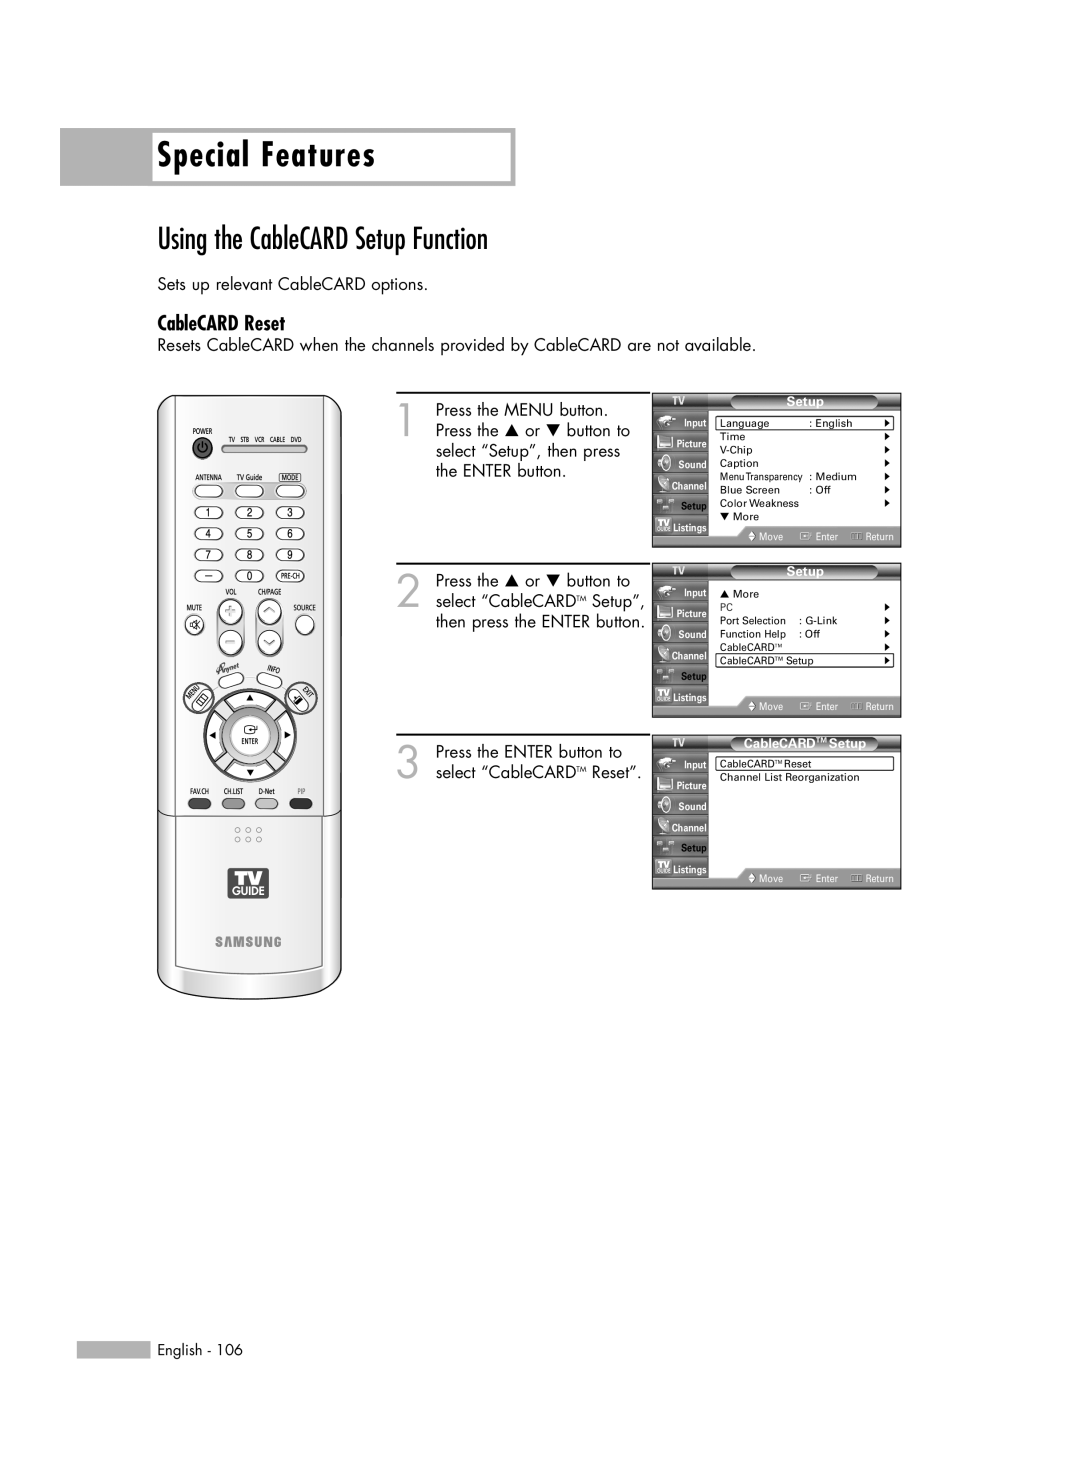 Samsung HL-R5688W manual Using the CableCARD Setup Function, CableCARD Reset, Special Features 